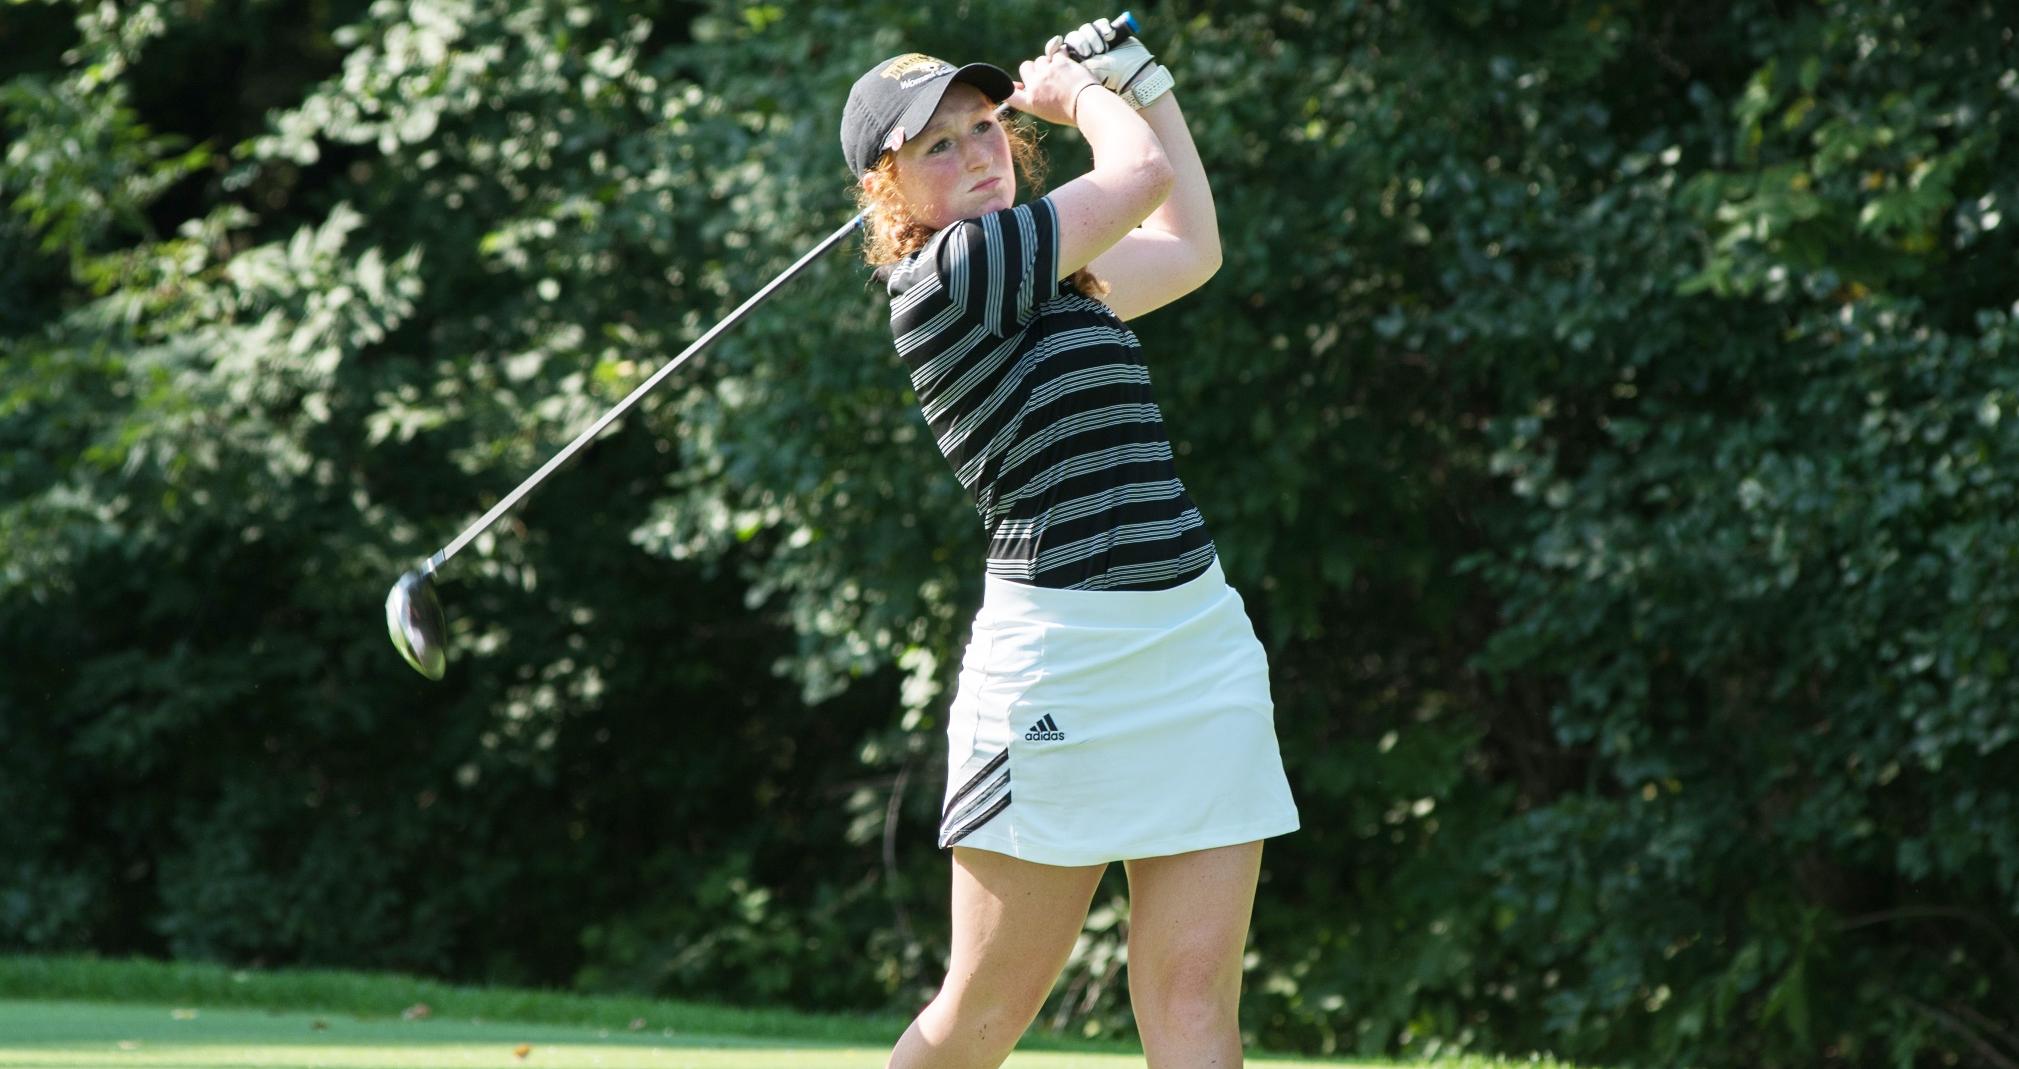 Micayla Richards counted 169 strokes over 36 holes to finish 68th at the Kathy Niepagen Spring Fling.